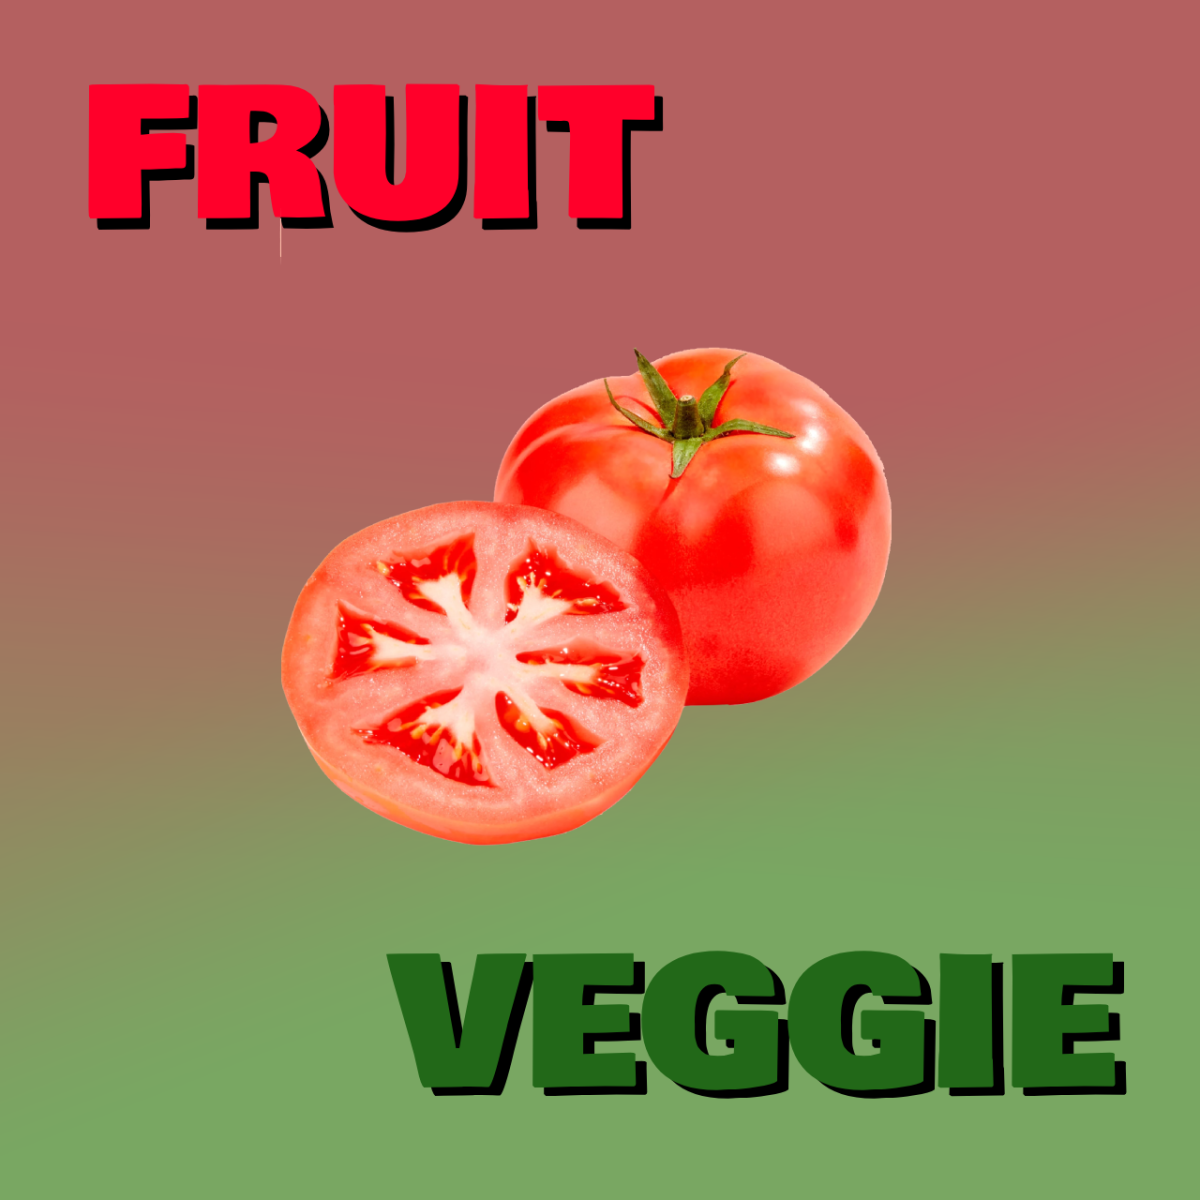 Tomato+-+A+Fruit+or+Vegetable